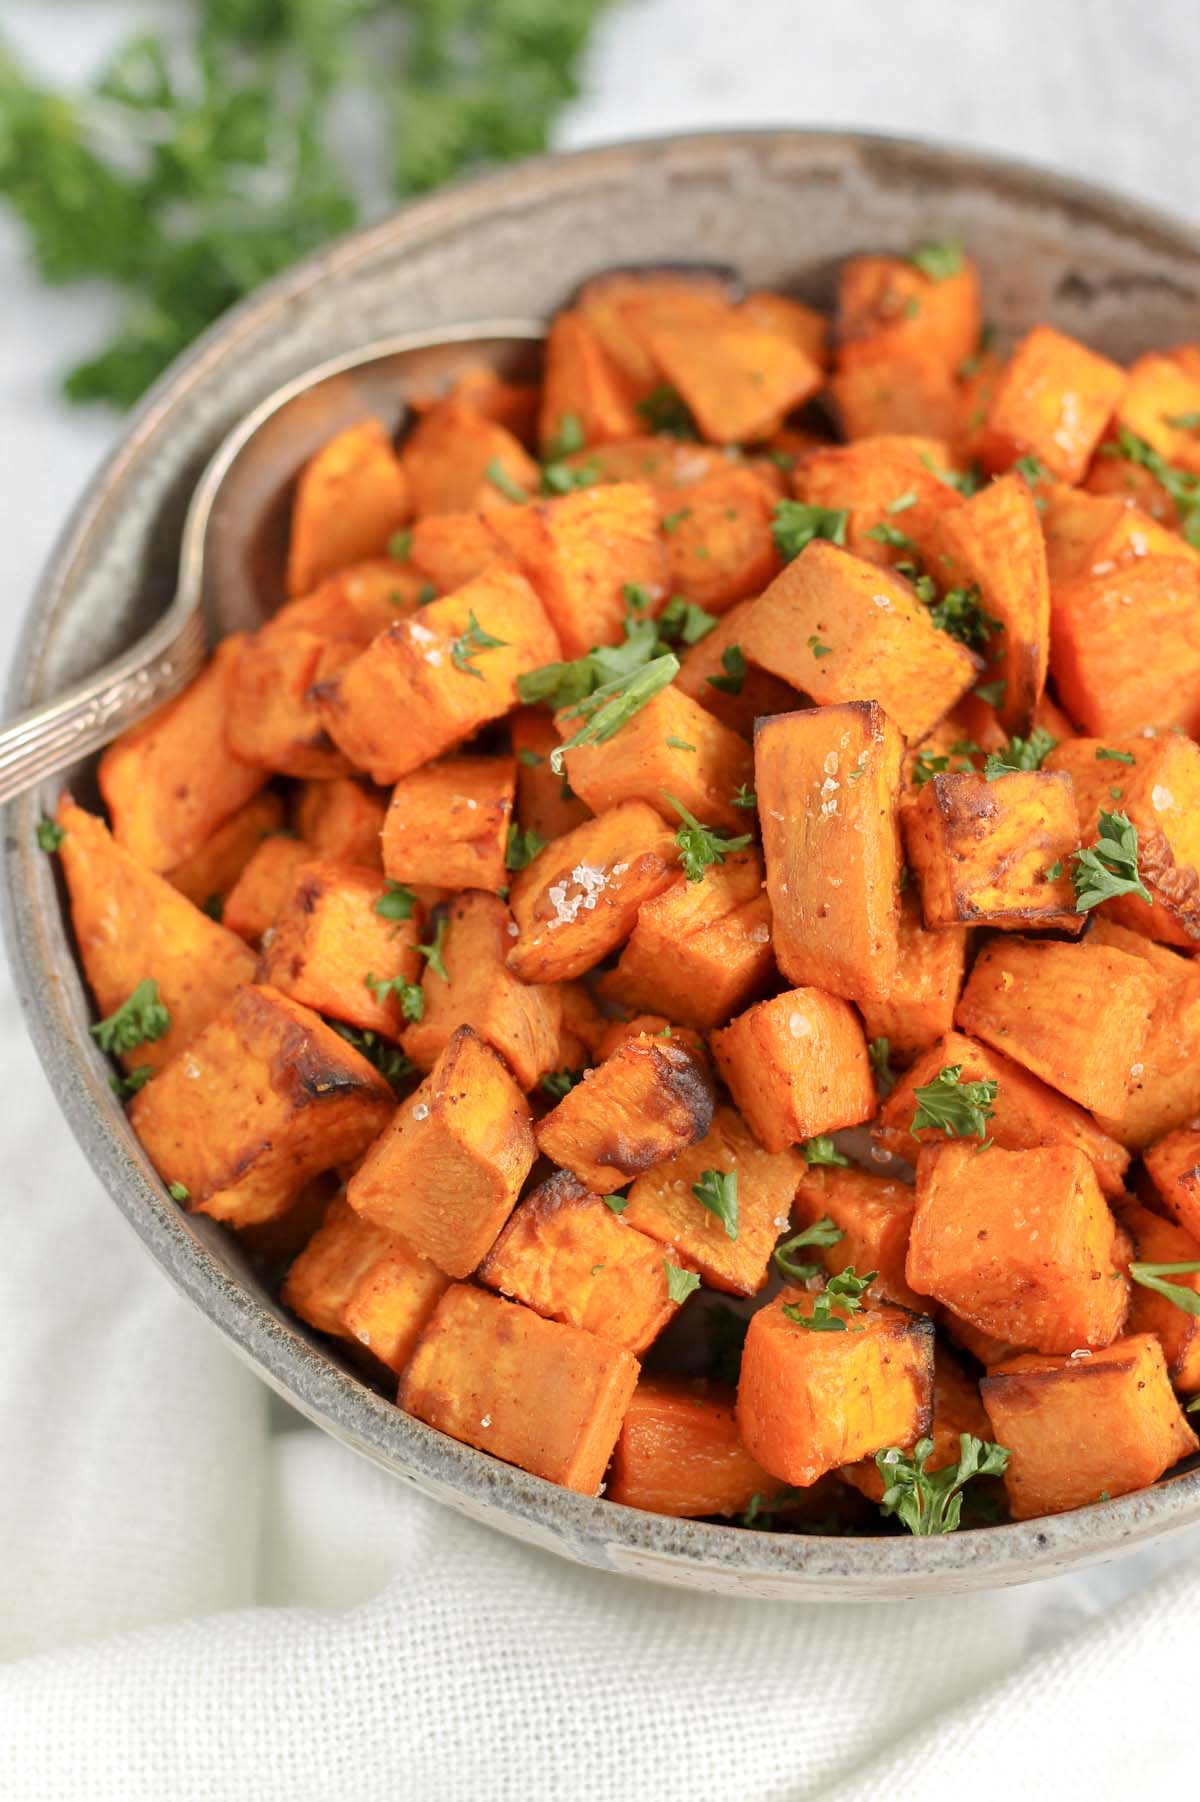 Air fried sweet potato cubes sprinkled with fresh parsley in a gray serving bowl with a serving spoon.